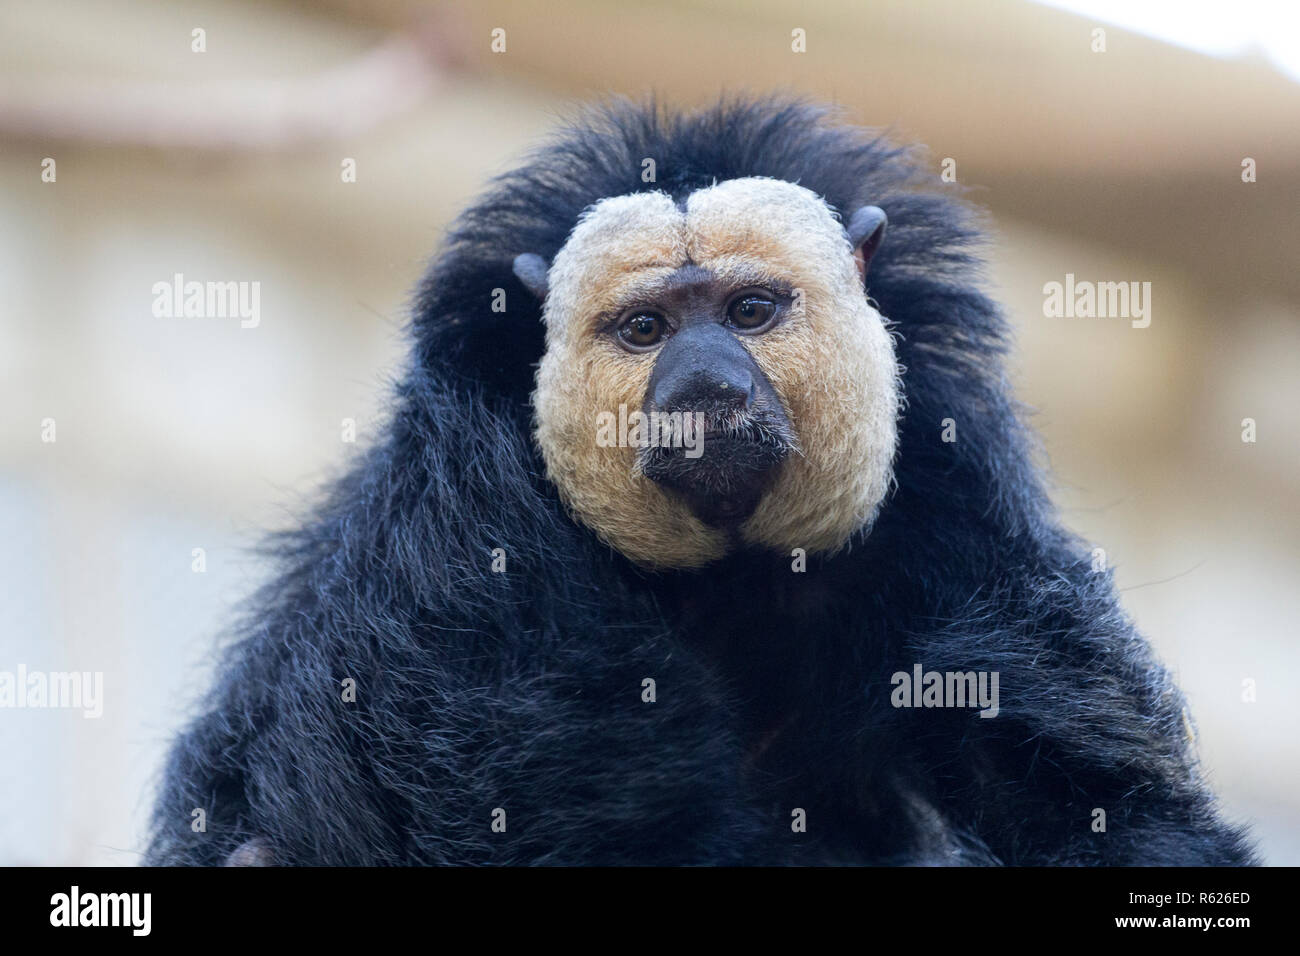 White-faced saki, primate from the order of broad-nosed monkeys. Stock Photo